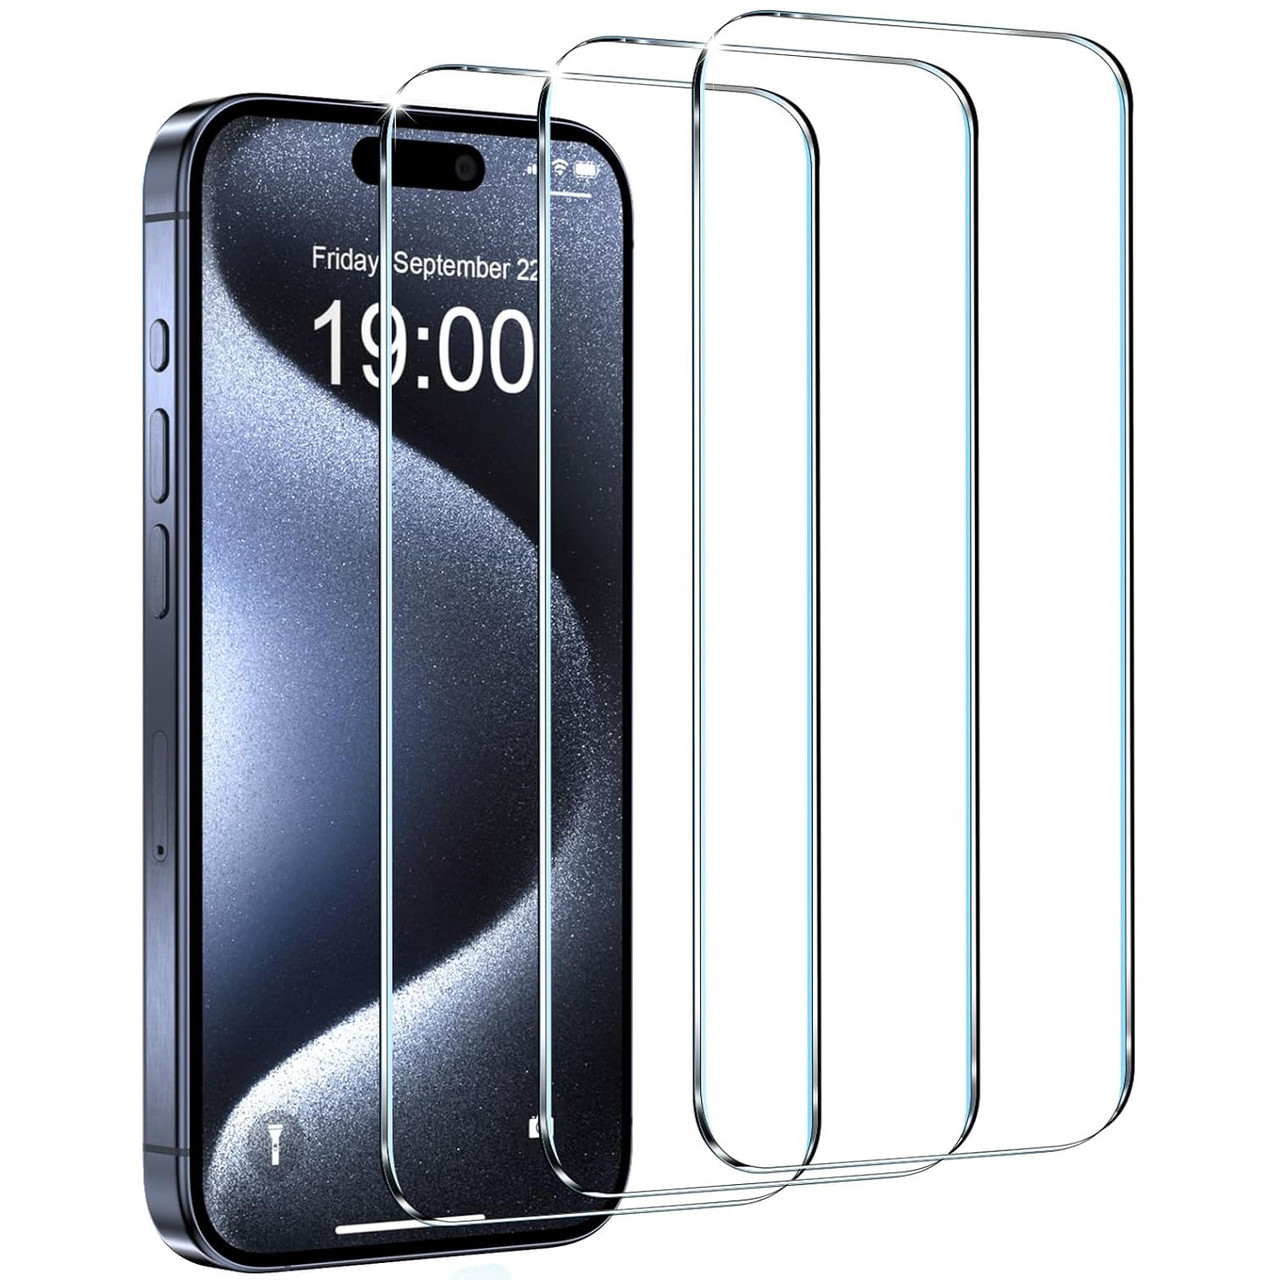 Apple iPhone 15 Pro Max Tempered Glass